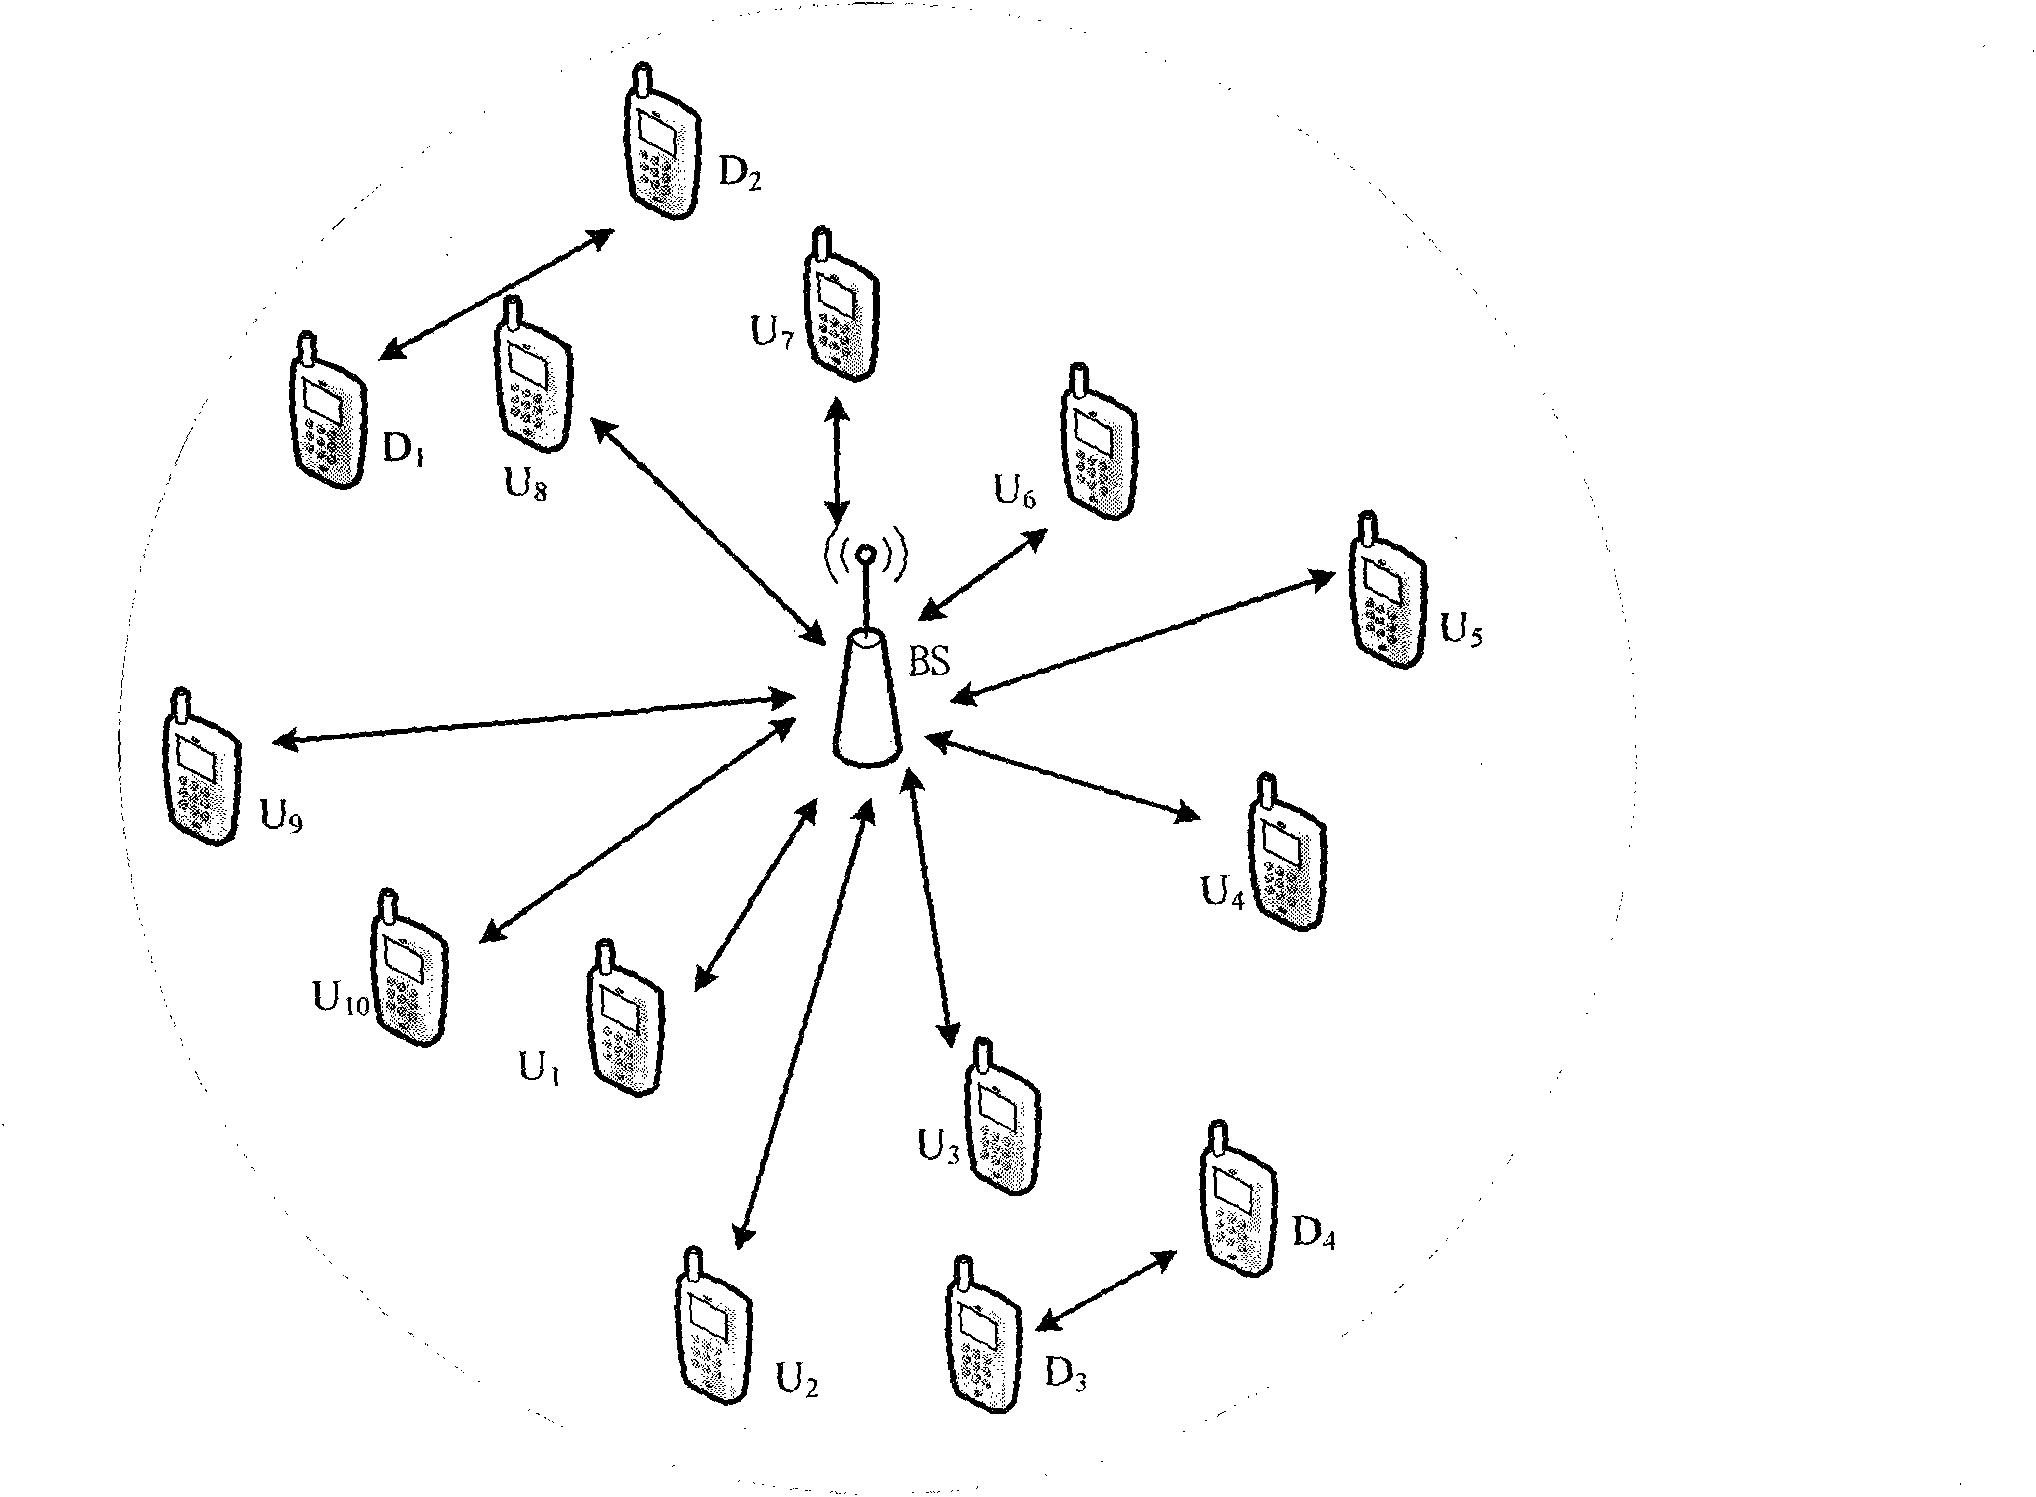 Method for multiplexing cellular user resources of device-to-device (D2D) user pairs based on base station positioning